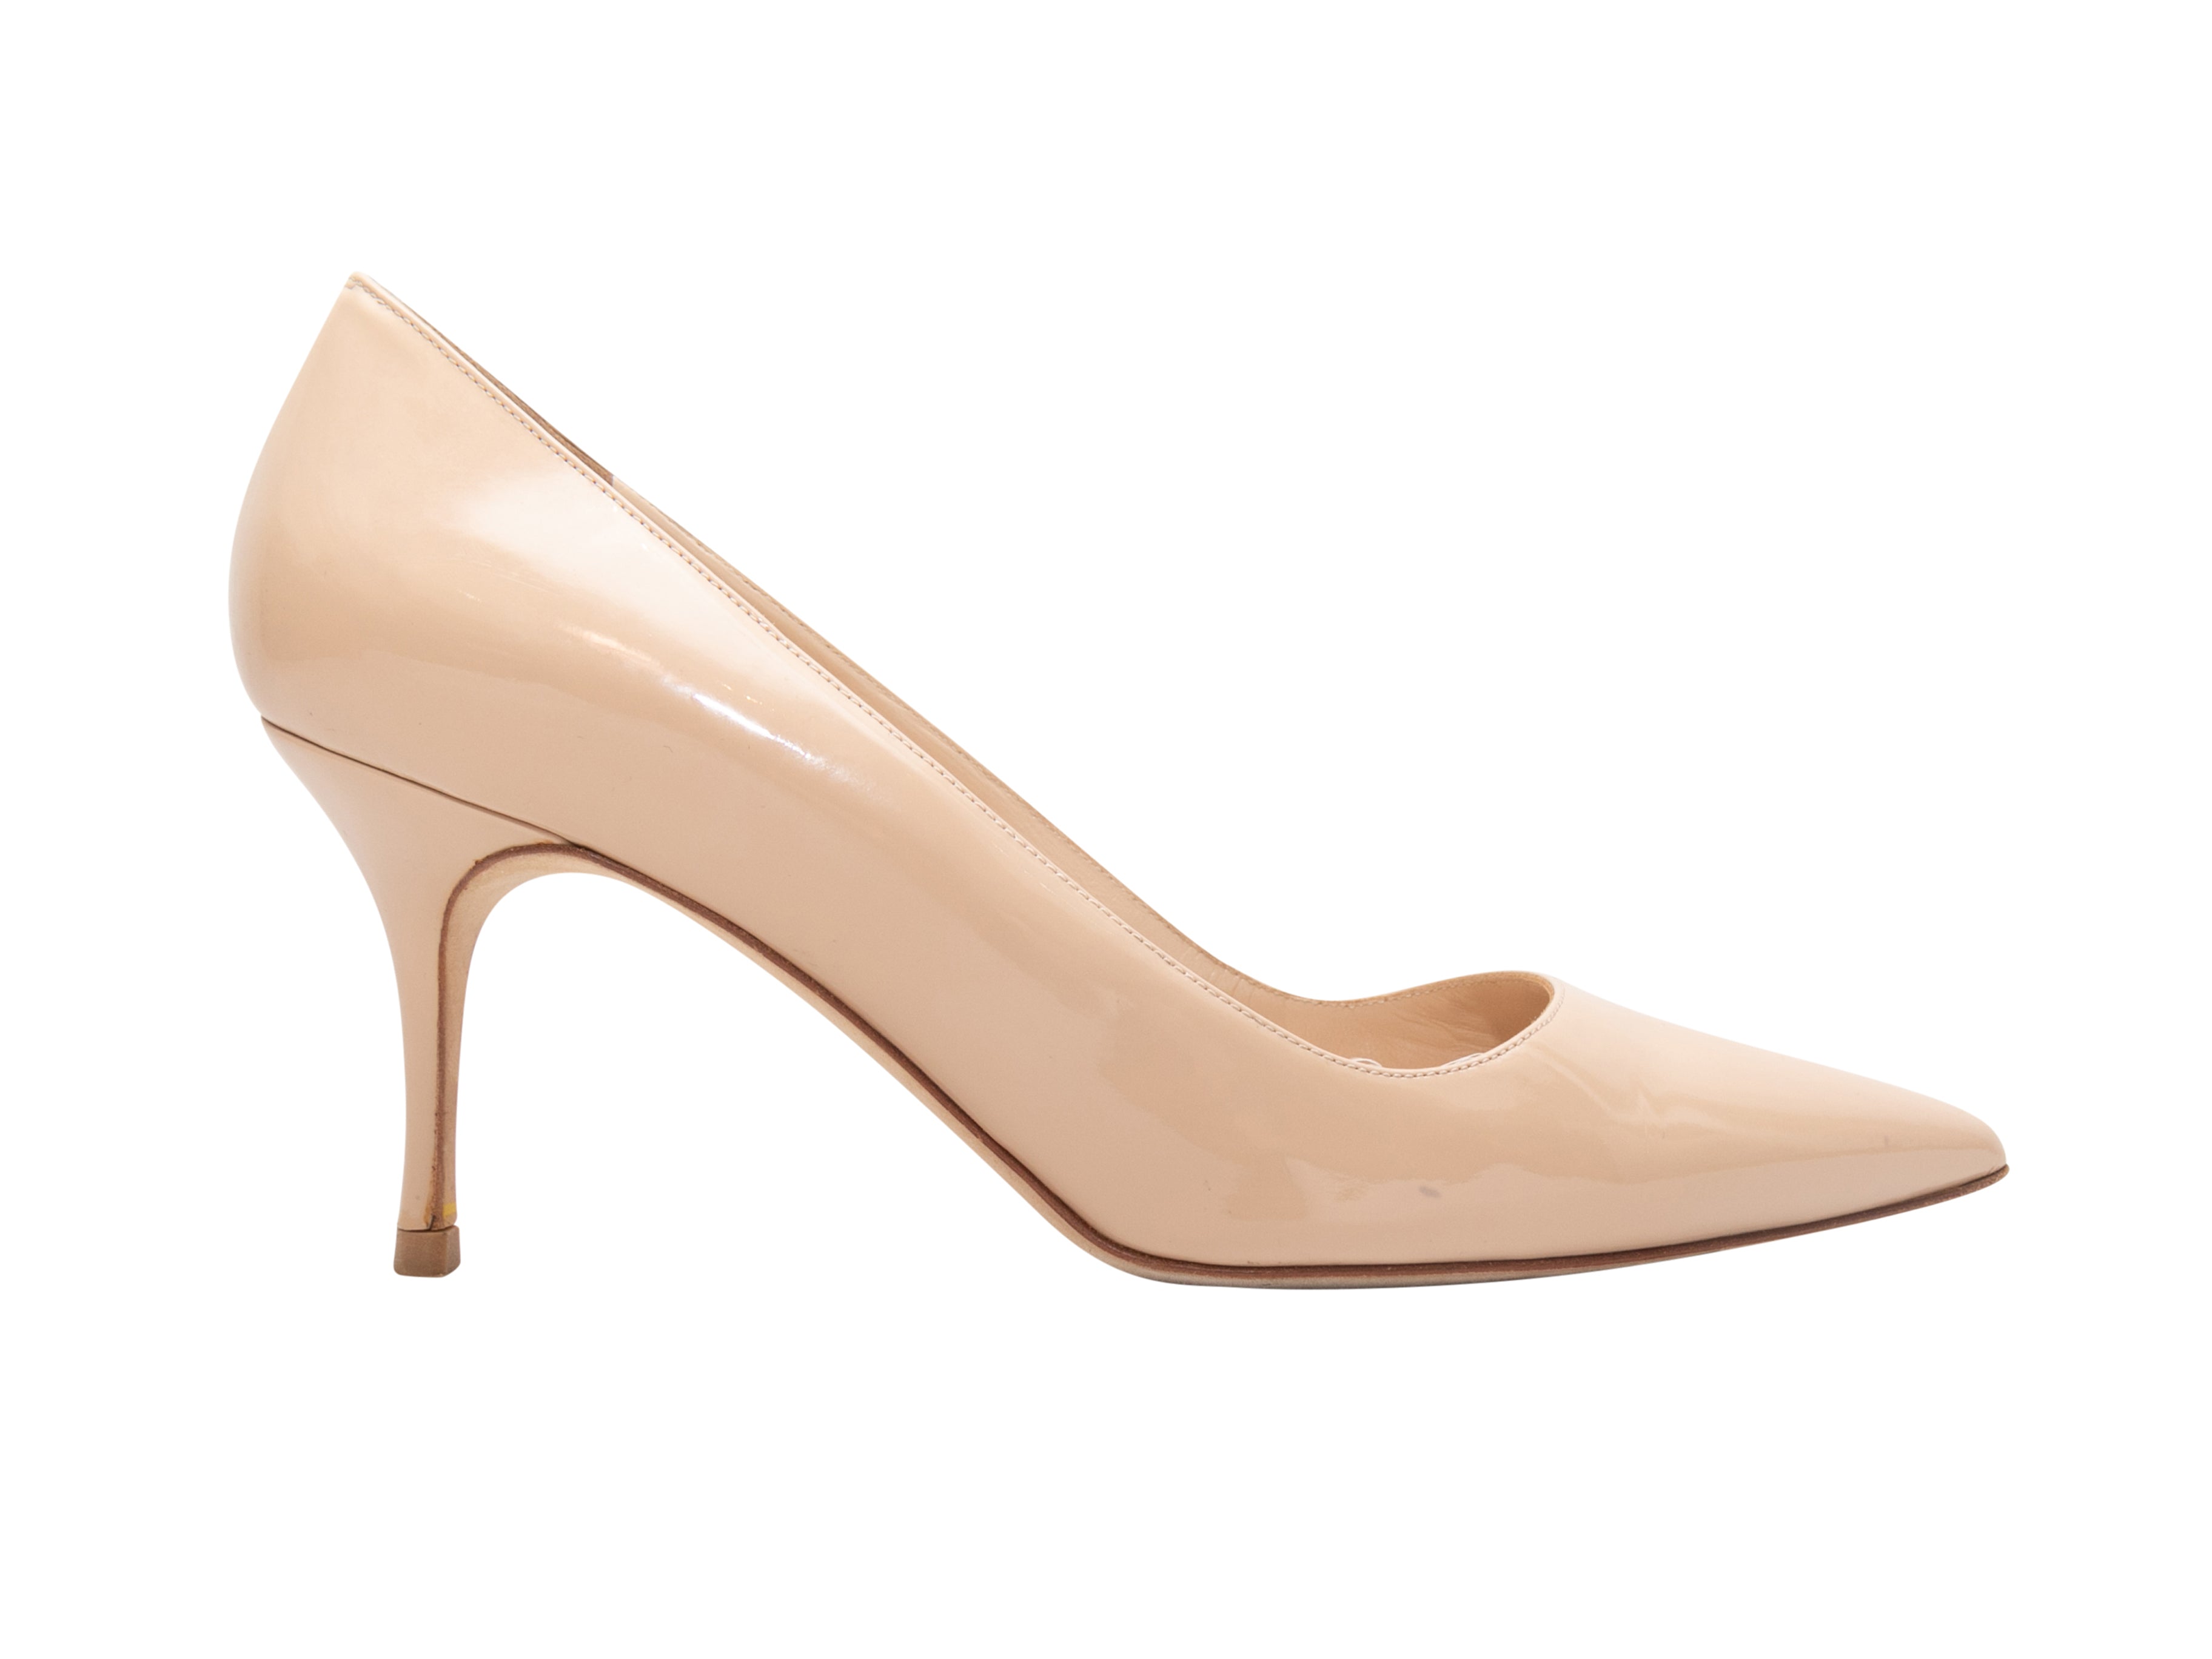 Patent Pointed-Toe Pumps Size 38.5